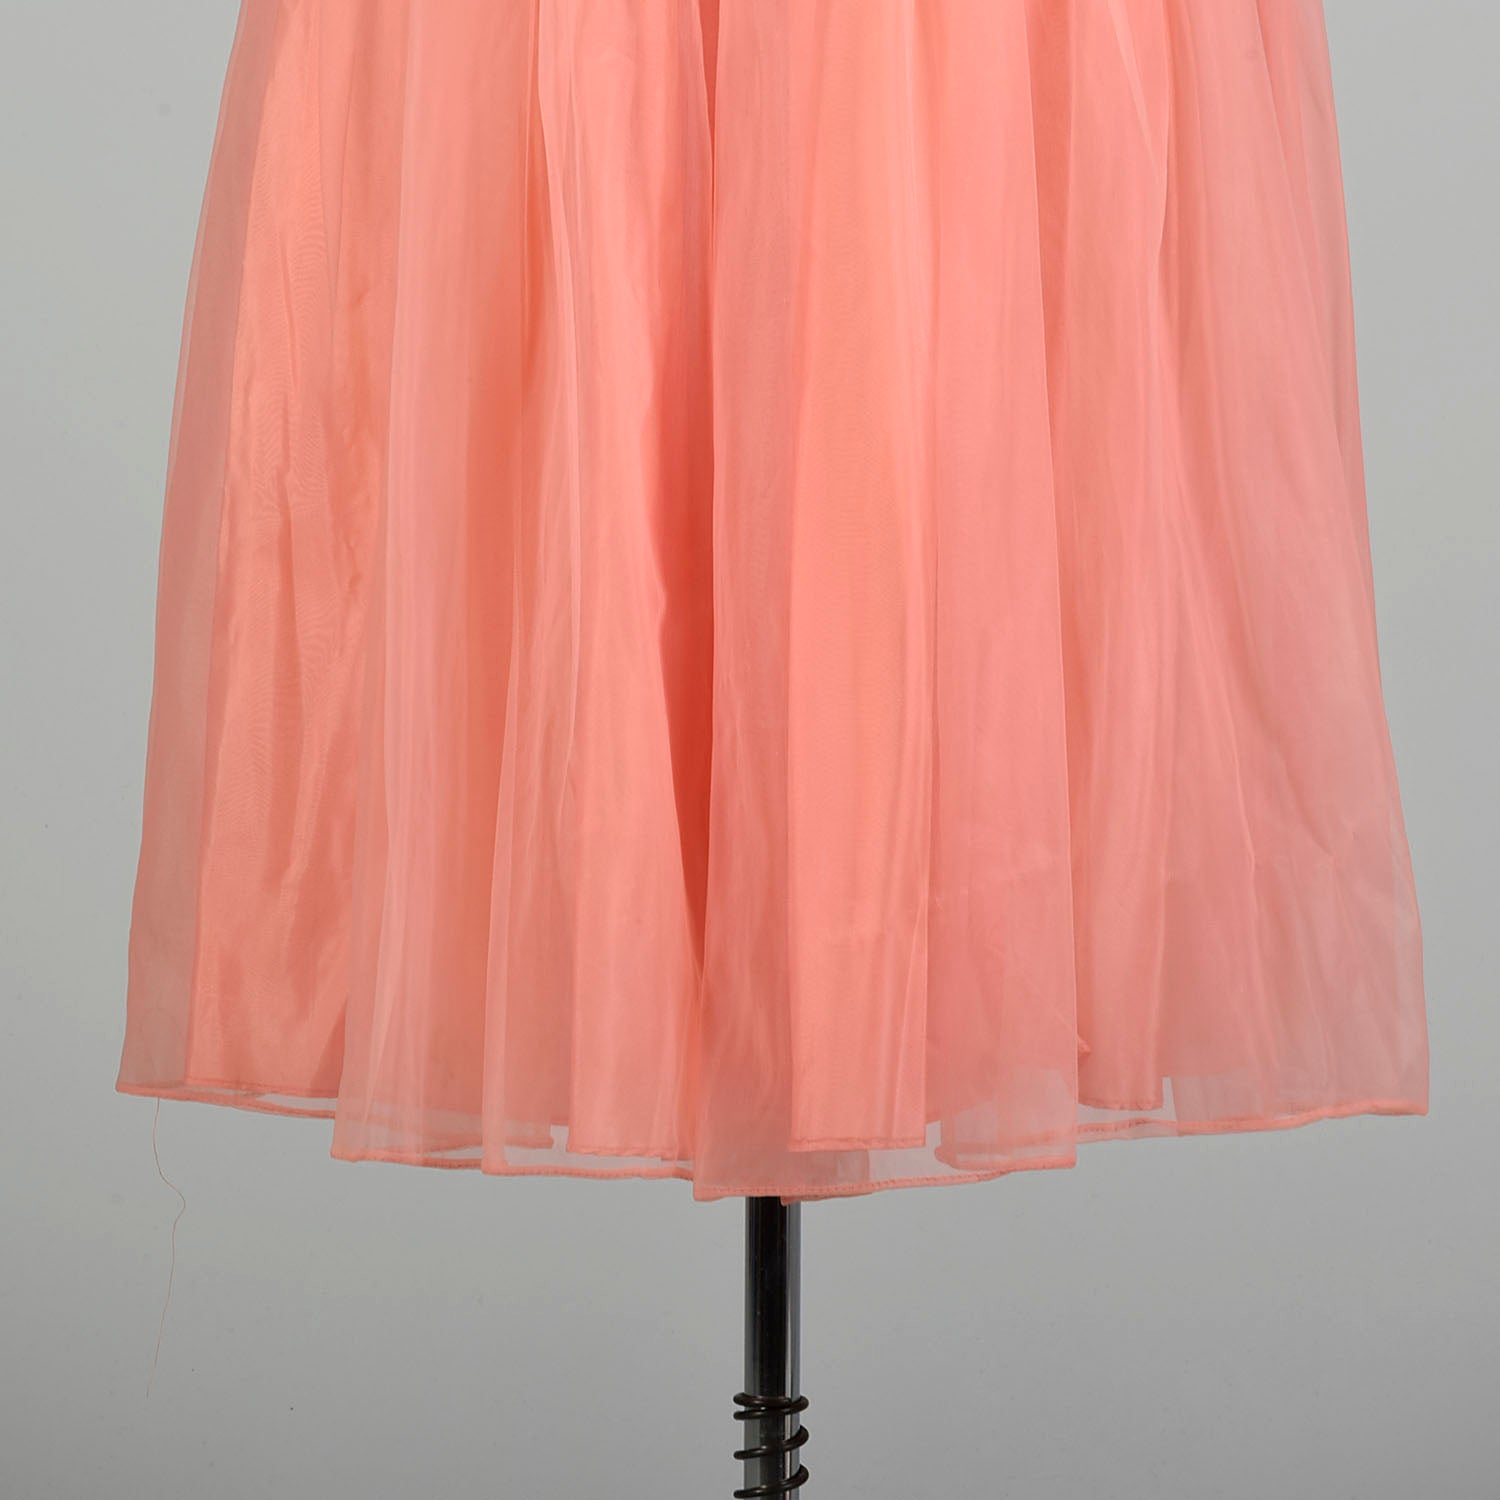 Small 1950s Pink Coral Prom Dress Bead Embellished Ruched Chiffon Bodice